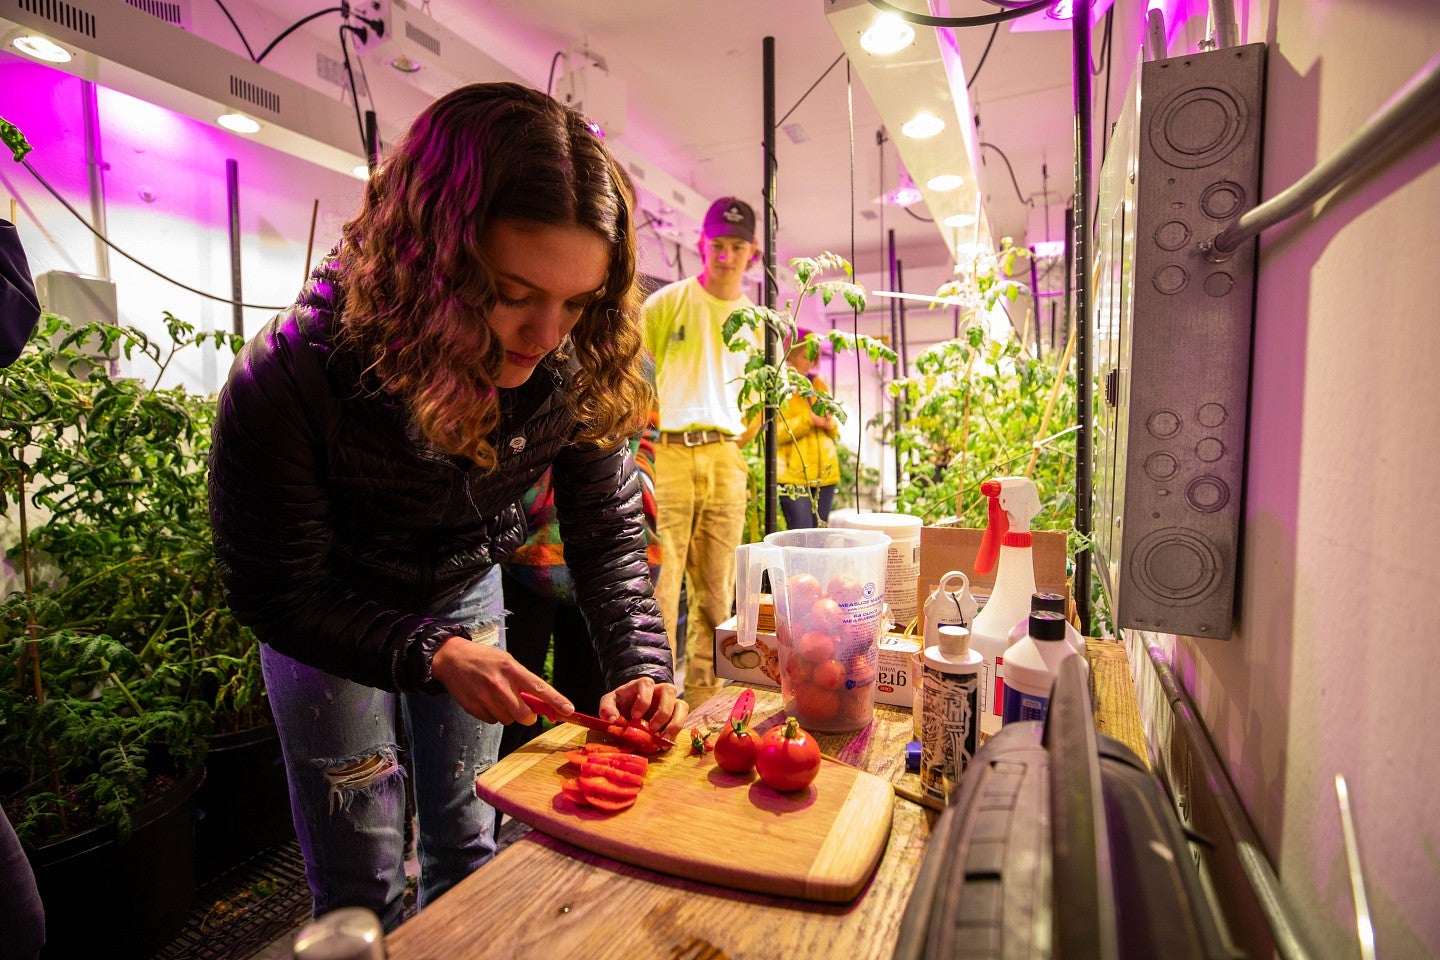 Students harvest ripe tomatoes from the Grow Pod, a project from the Office of Sustainability, on Friday, Jan. 11, 2019, at the University of Oregon in Eugene, Oregon.